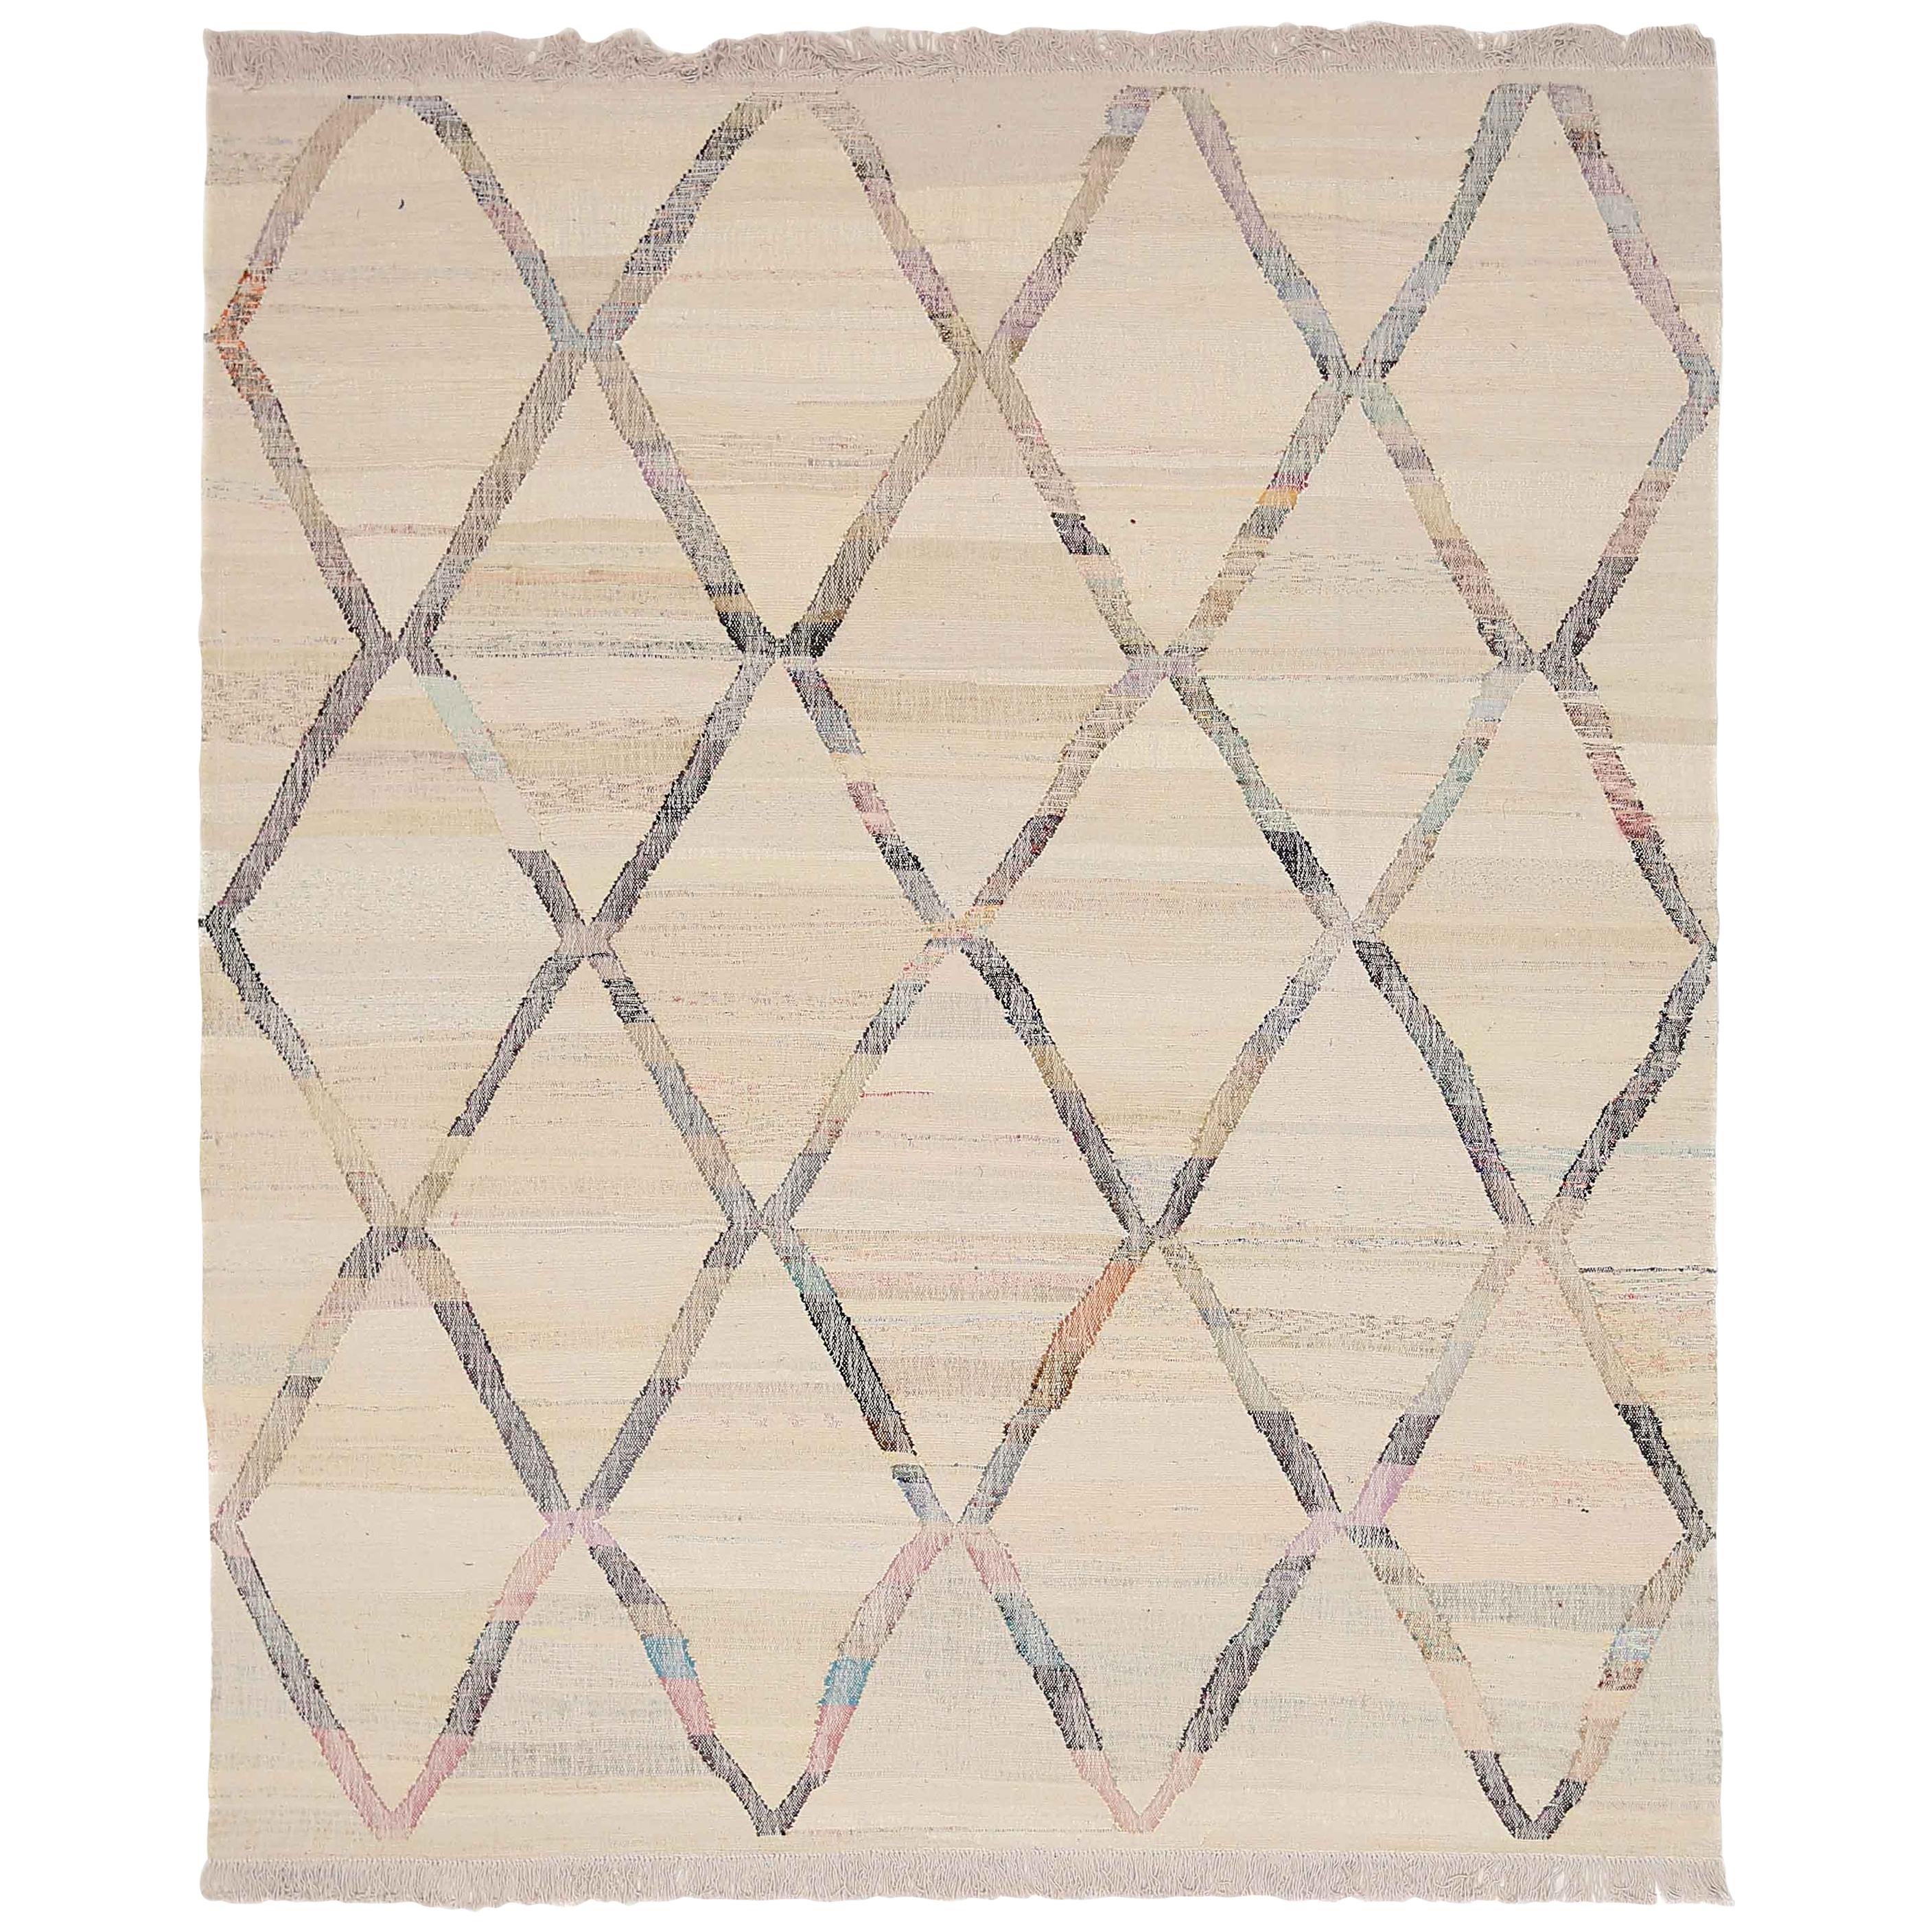 Modern Turkish Kilim Rug Made of Antique Wool with Colored Diamond Mesh Detail For Sale